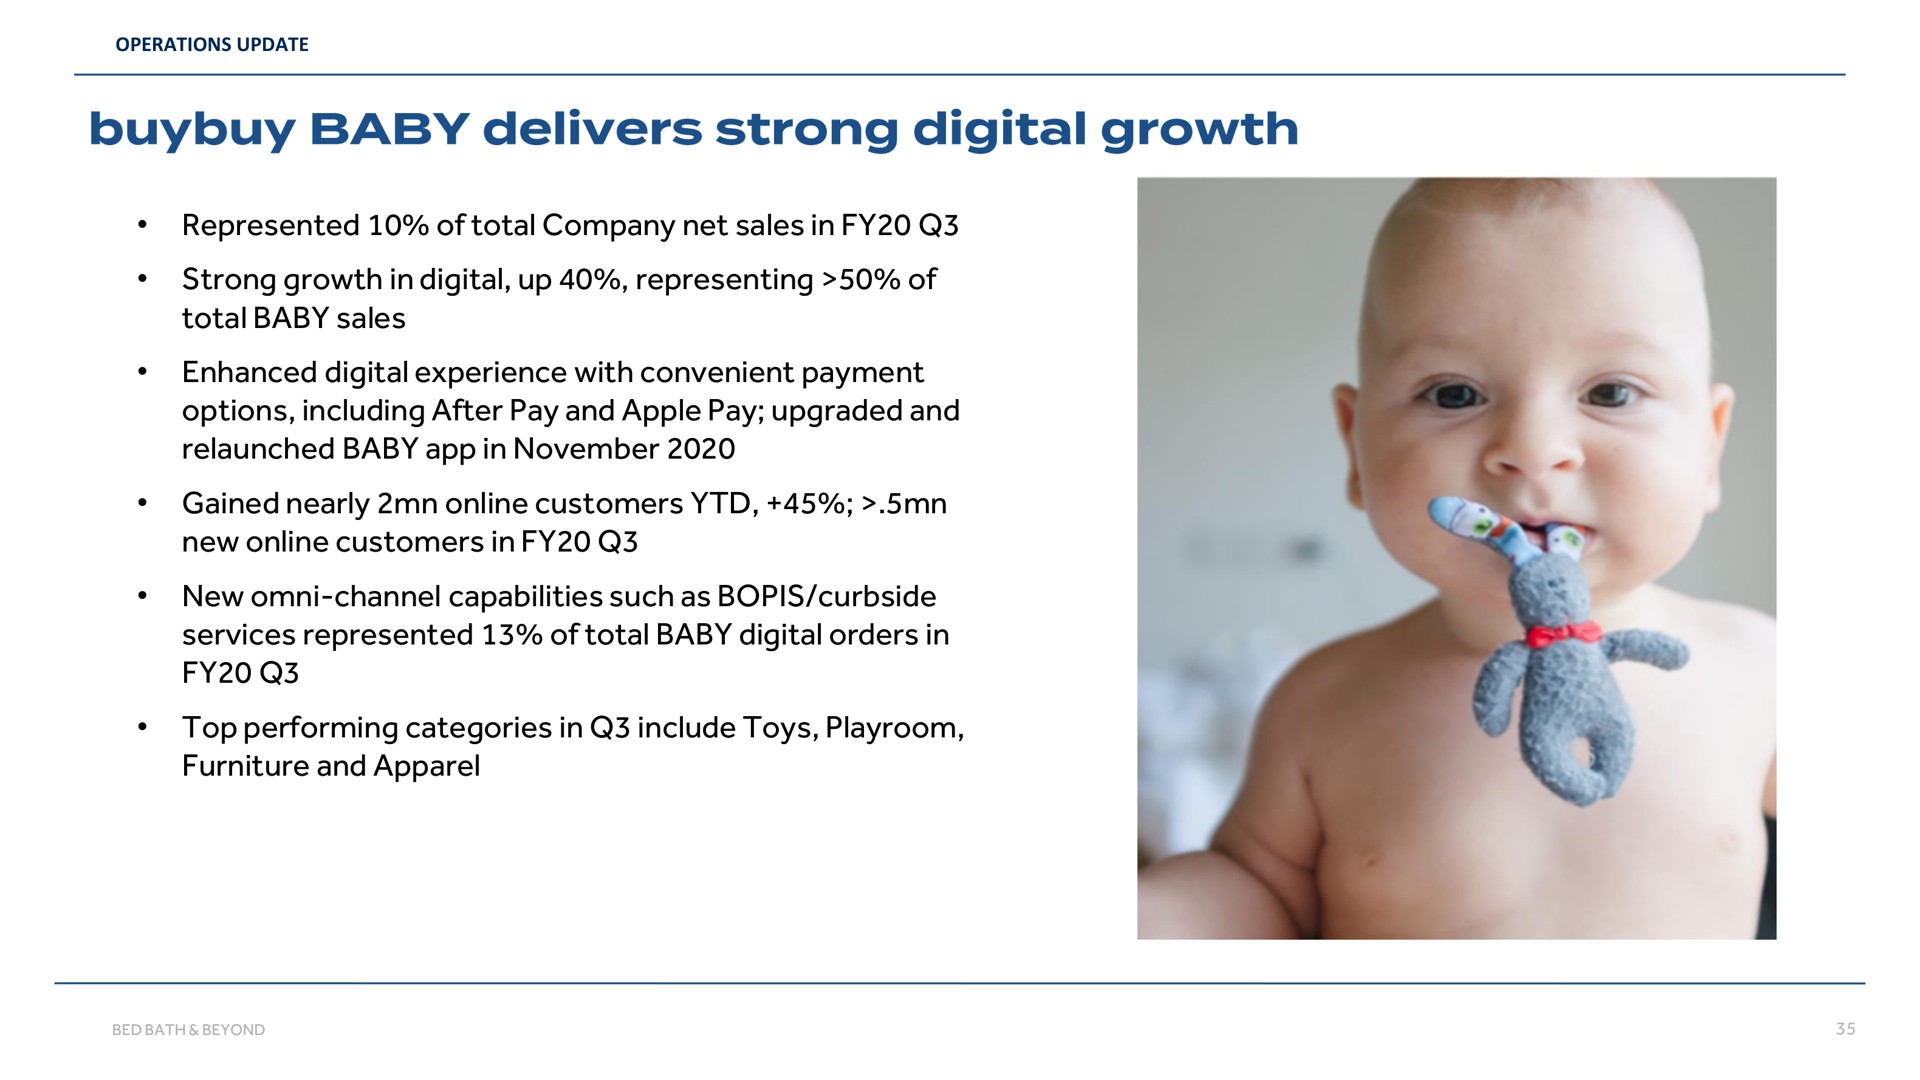 represented of total company net sales in strong growth in digital up representing of total baby sales enhanced digital experience with convenient payment options including after pay and apple pay upgraded and baby in gained nearly customers new customers in new channel capabilities such as services represented of total baby digital orders in top performing categories in include toys playroom furniture and apparel delivers | Bed Bath & Beyond